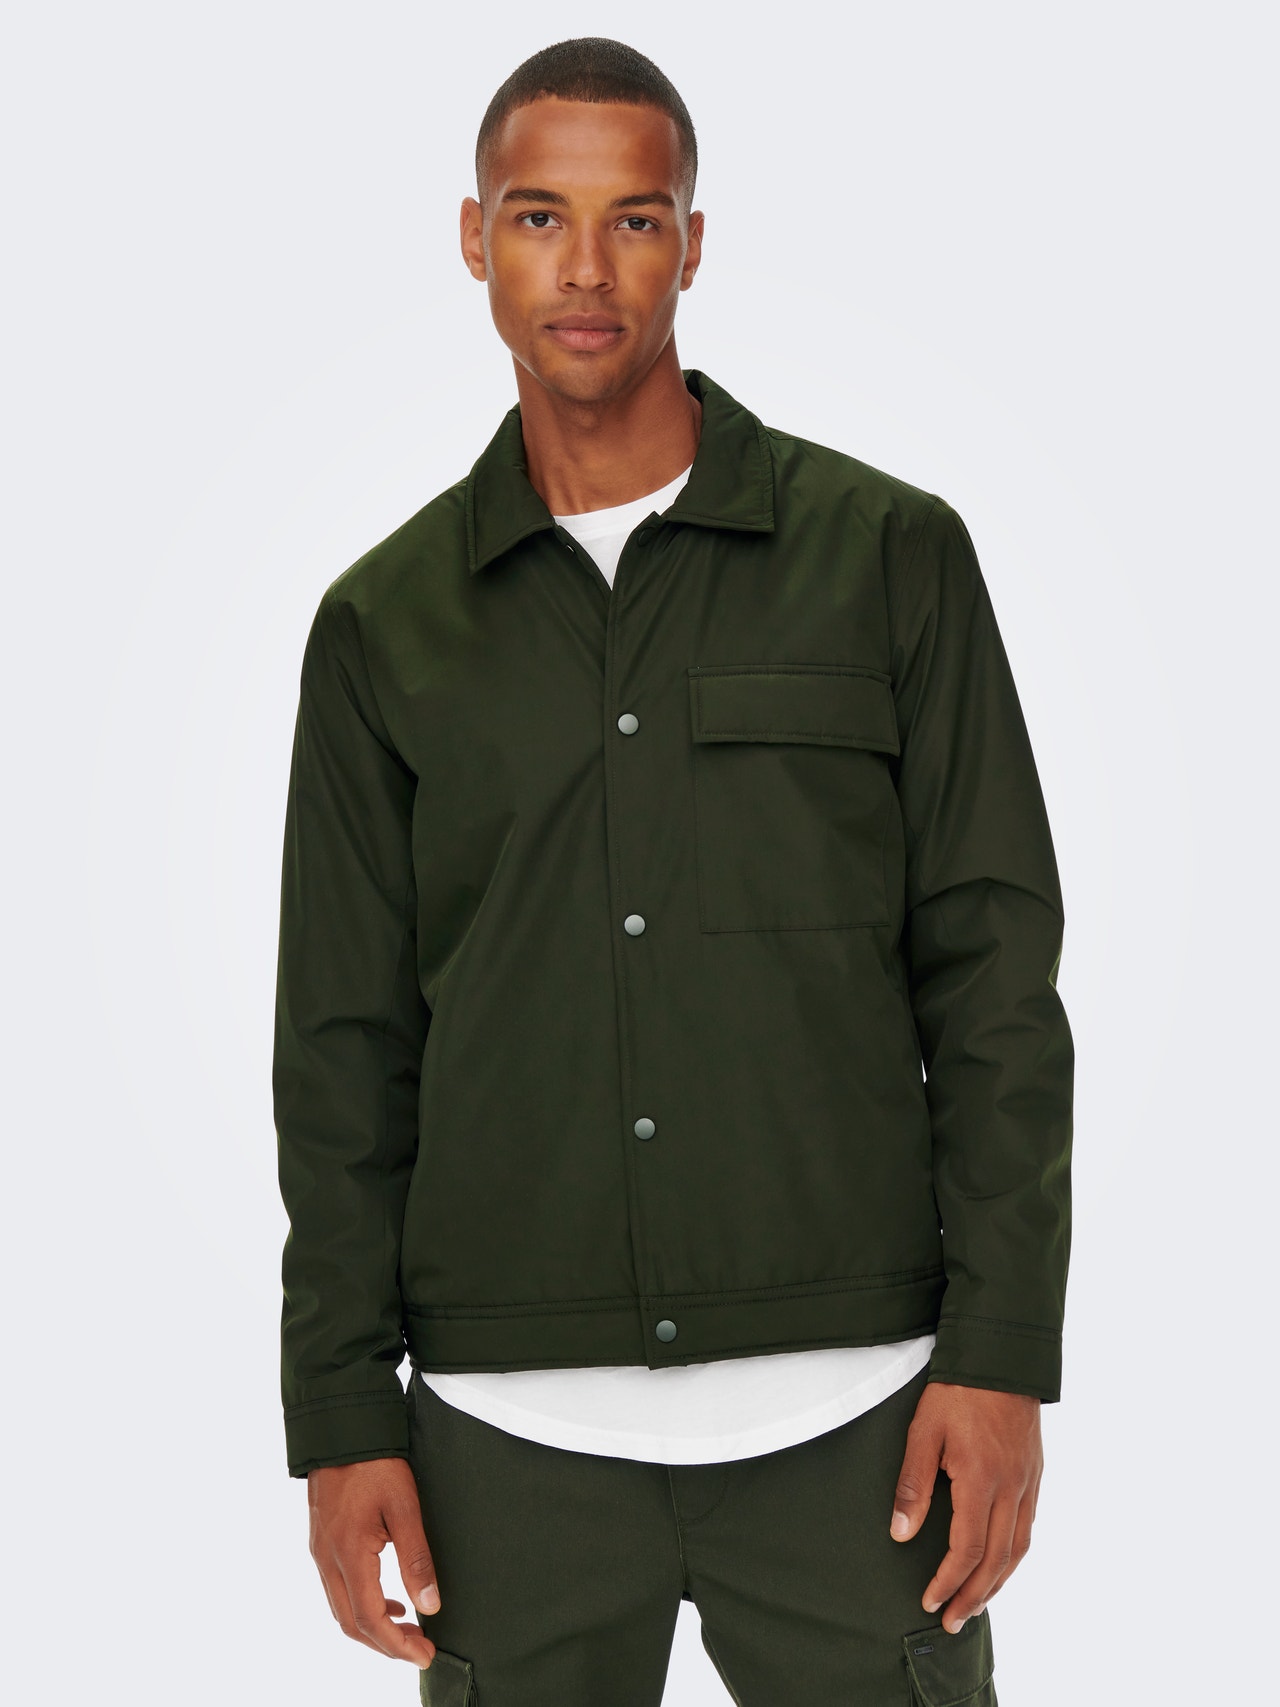 ONLY & SONS Jacket -Rosin - 22022462